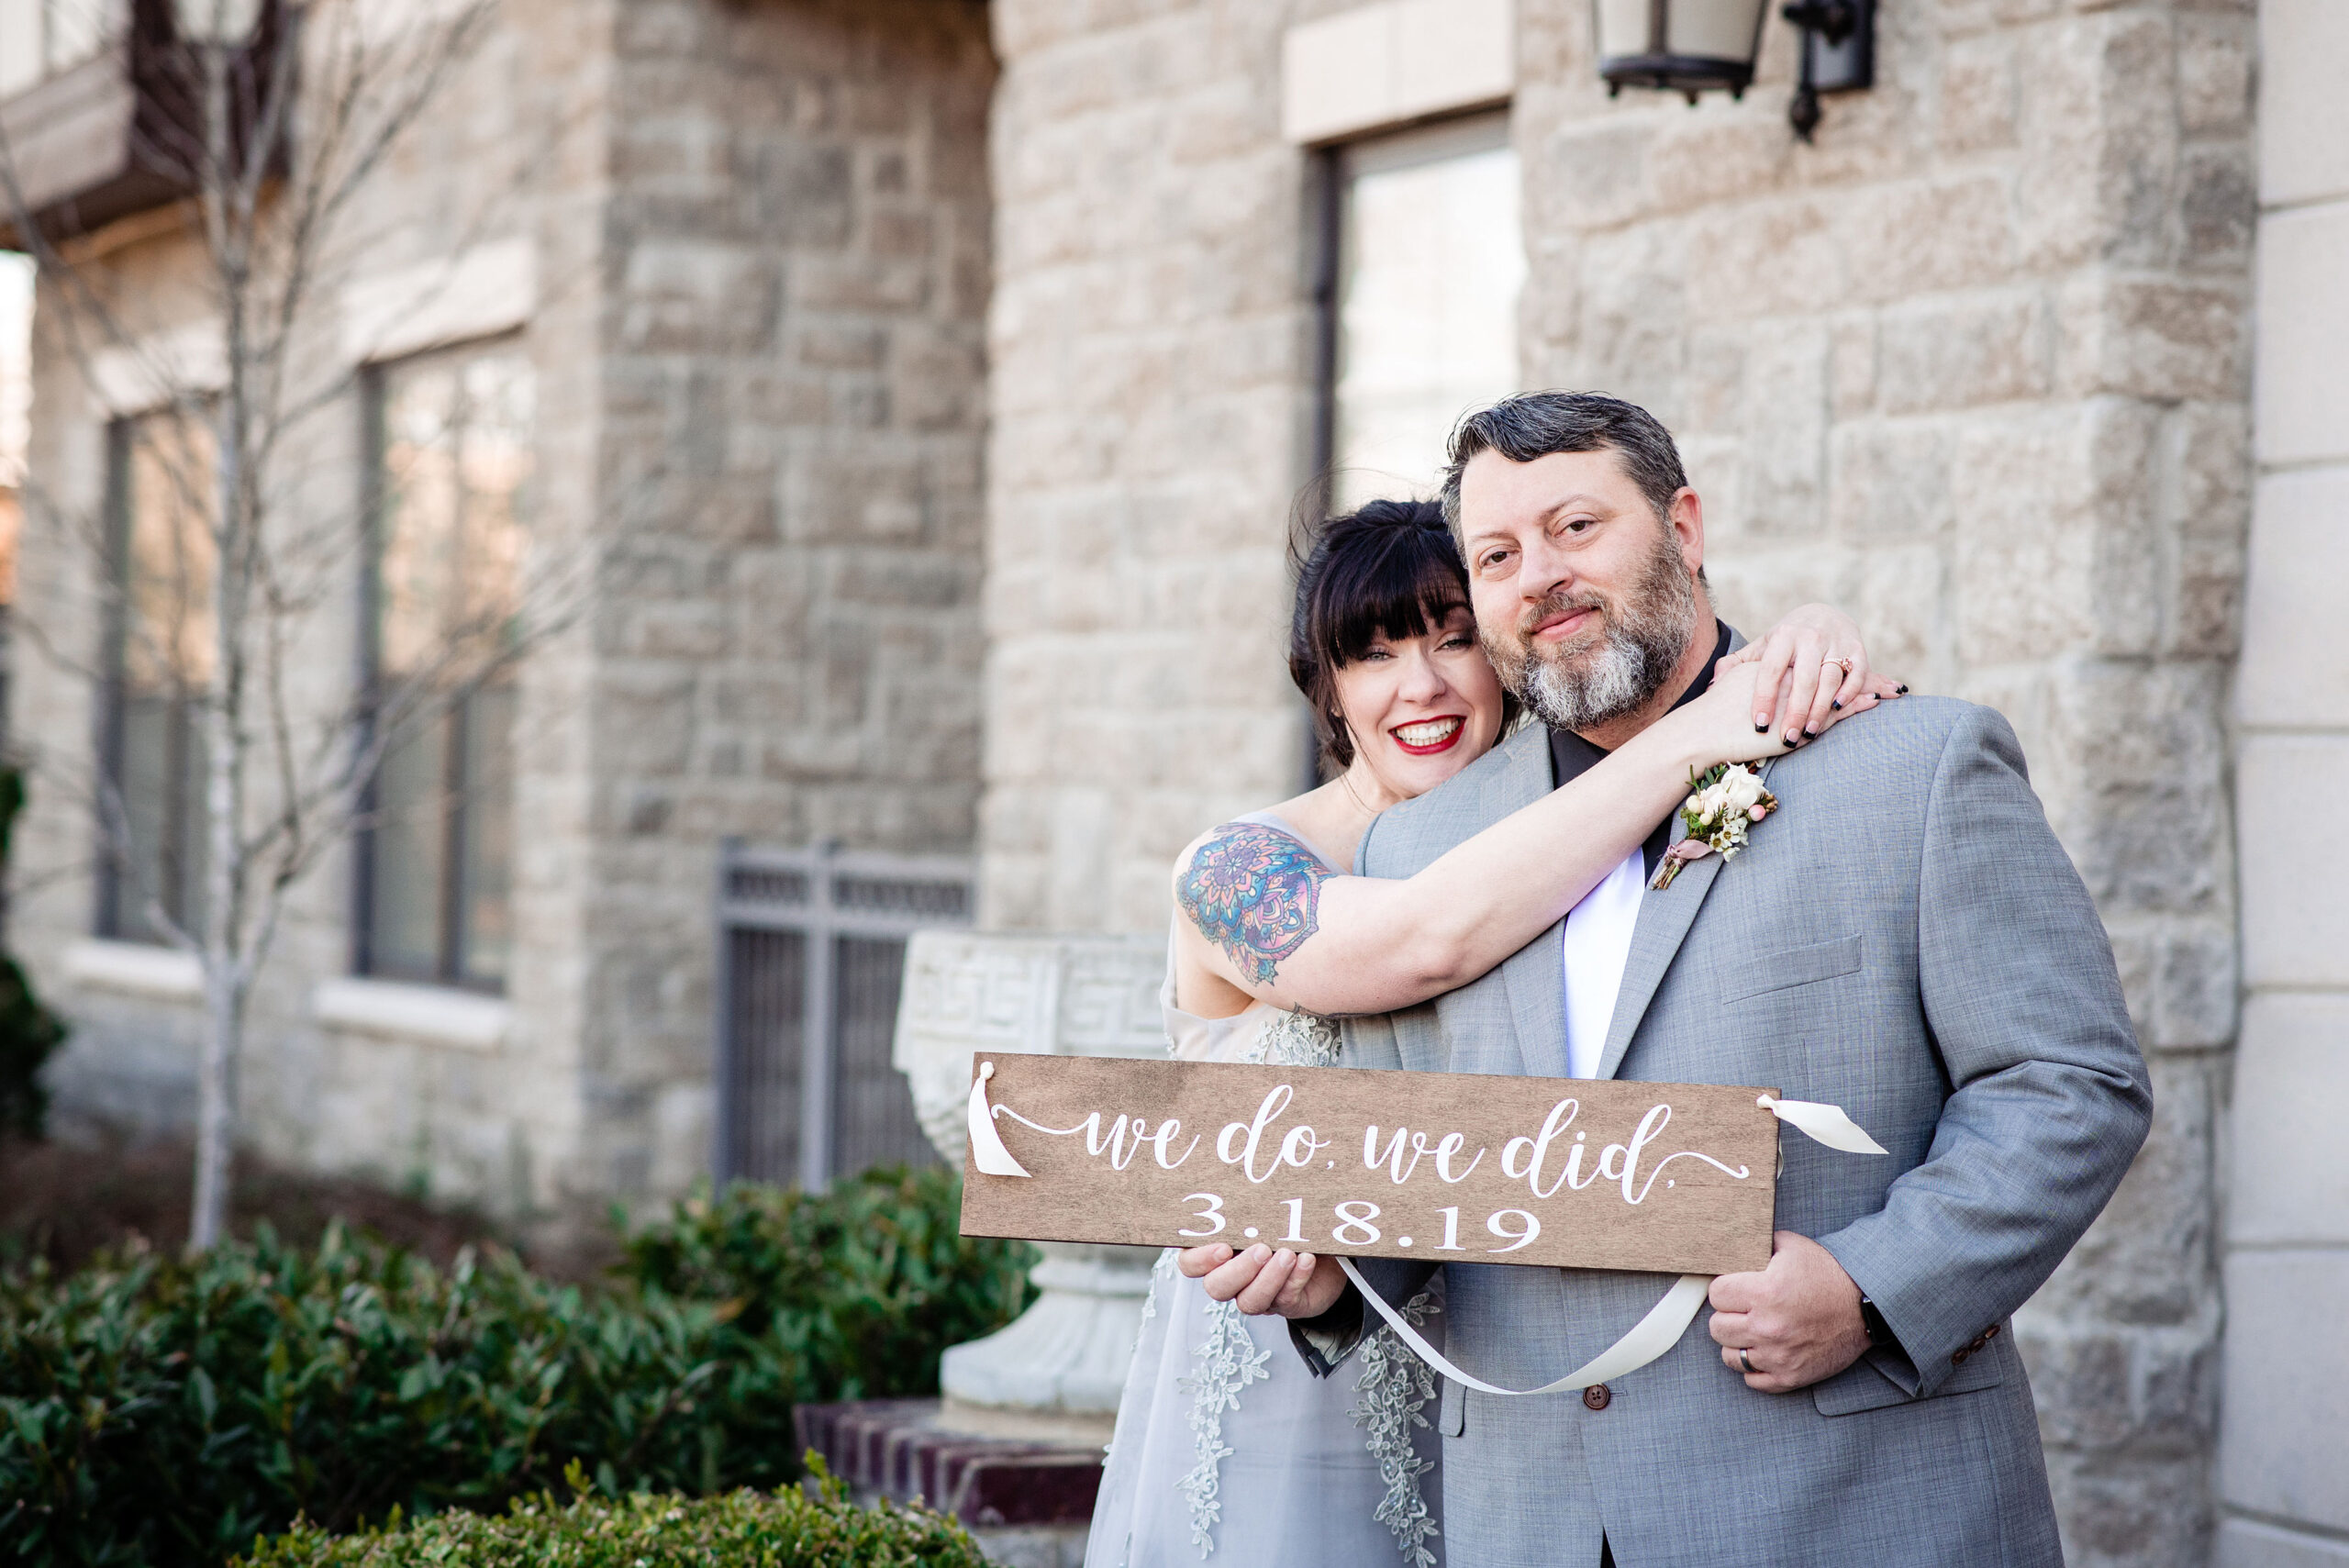 The bride, wearing a lace silver dress, loops her arms around the groom's neck. The groom, wearing a gray suit with a black shirt, white tie and white and mauve boutonniere, holds up a wooden sign announcing their elopement. The sign says, We Do, We Did. They are standing in front of a stone building. 